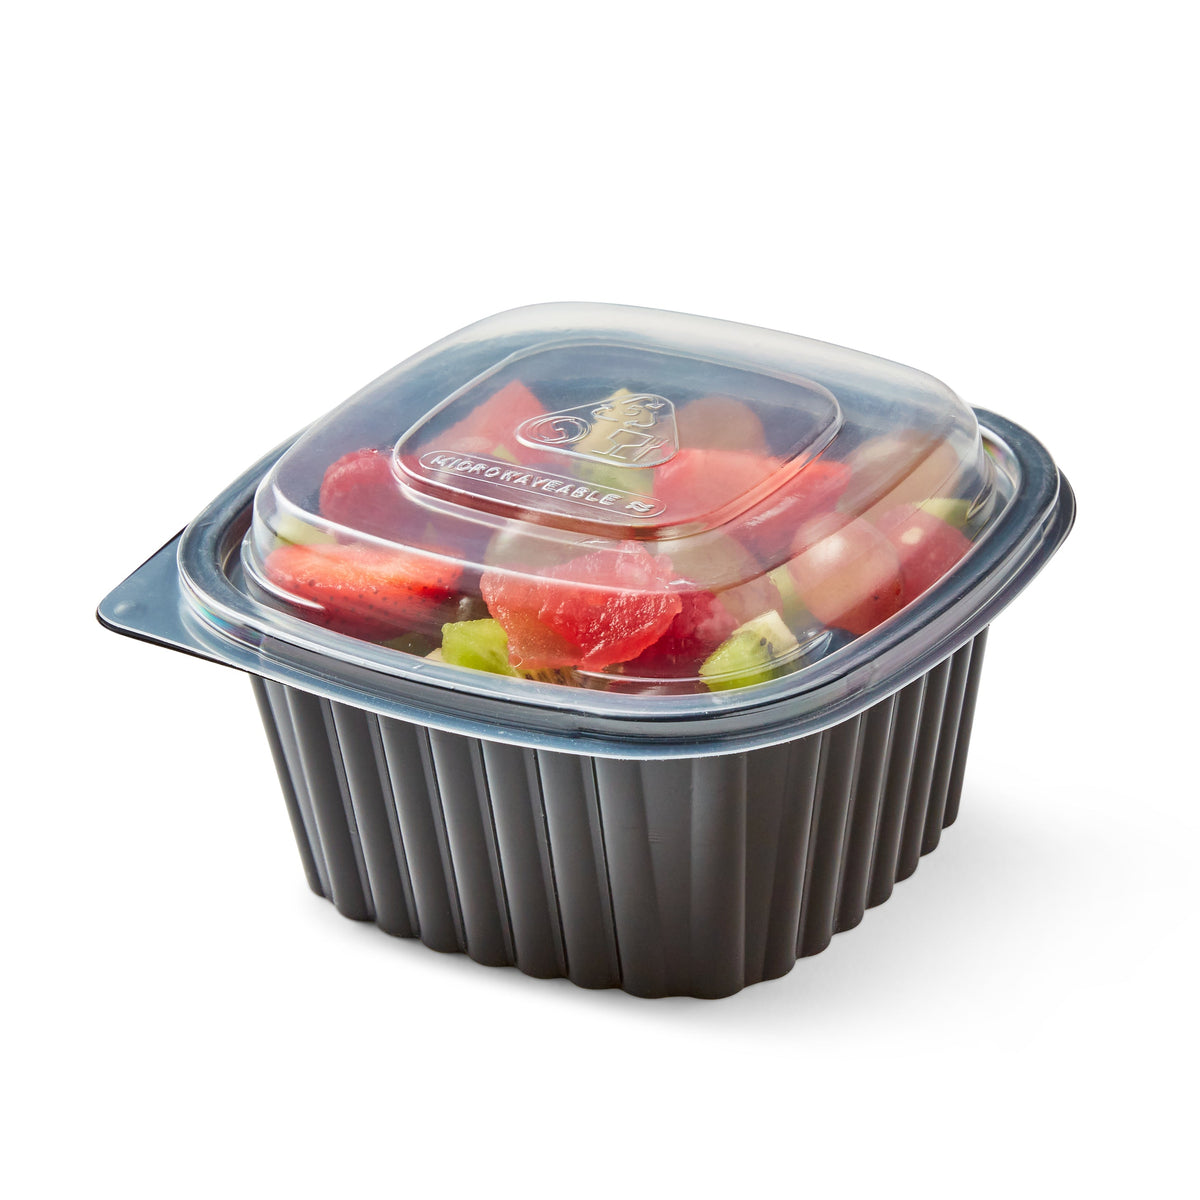 30 x 560 ml (19.7 ounce) Microwavable Meal Prep Hot Food Containers & Lids (137mm x 137mm x 80mm)